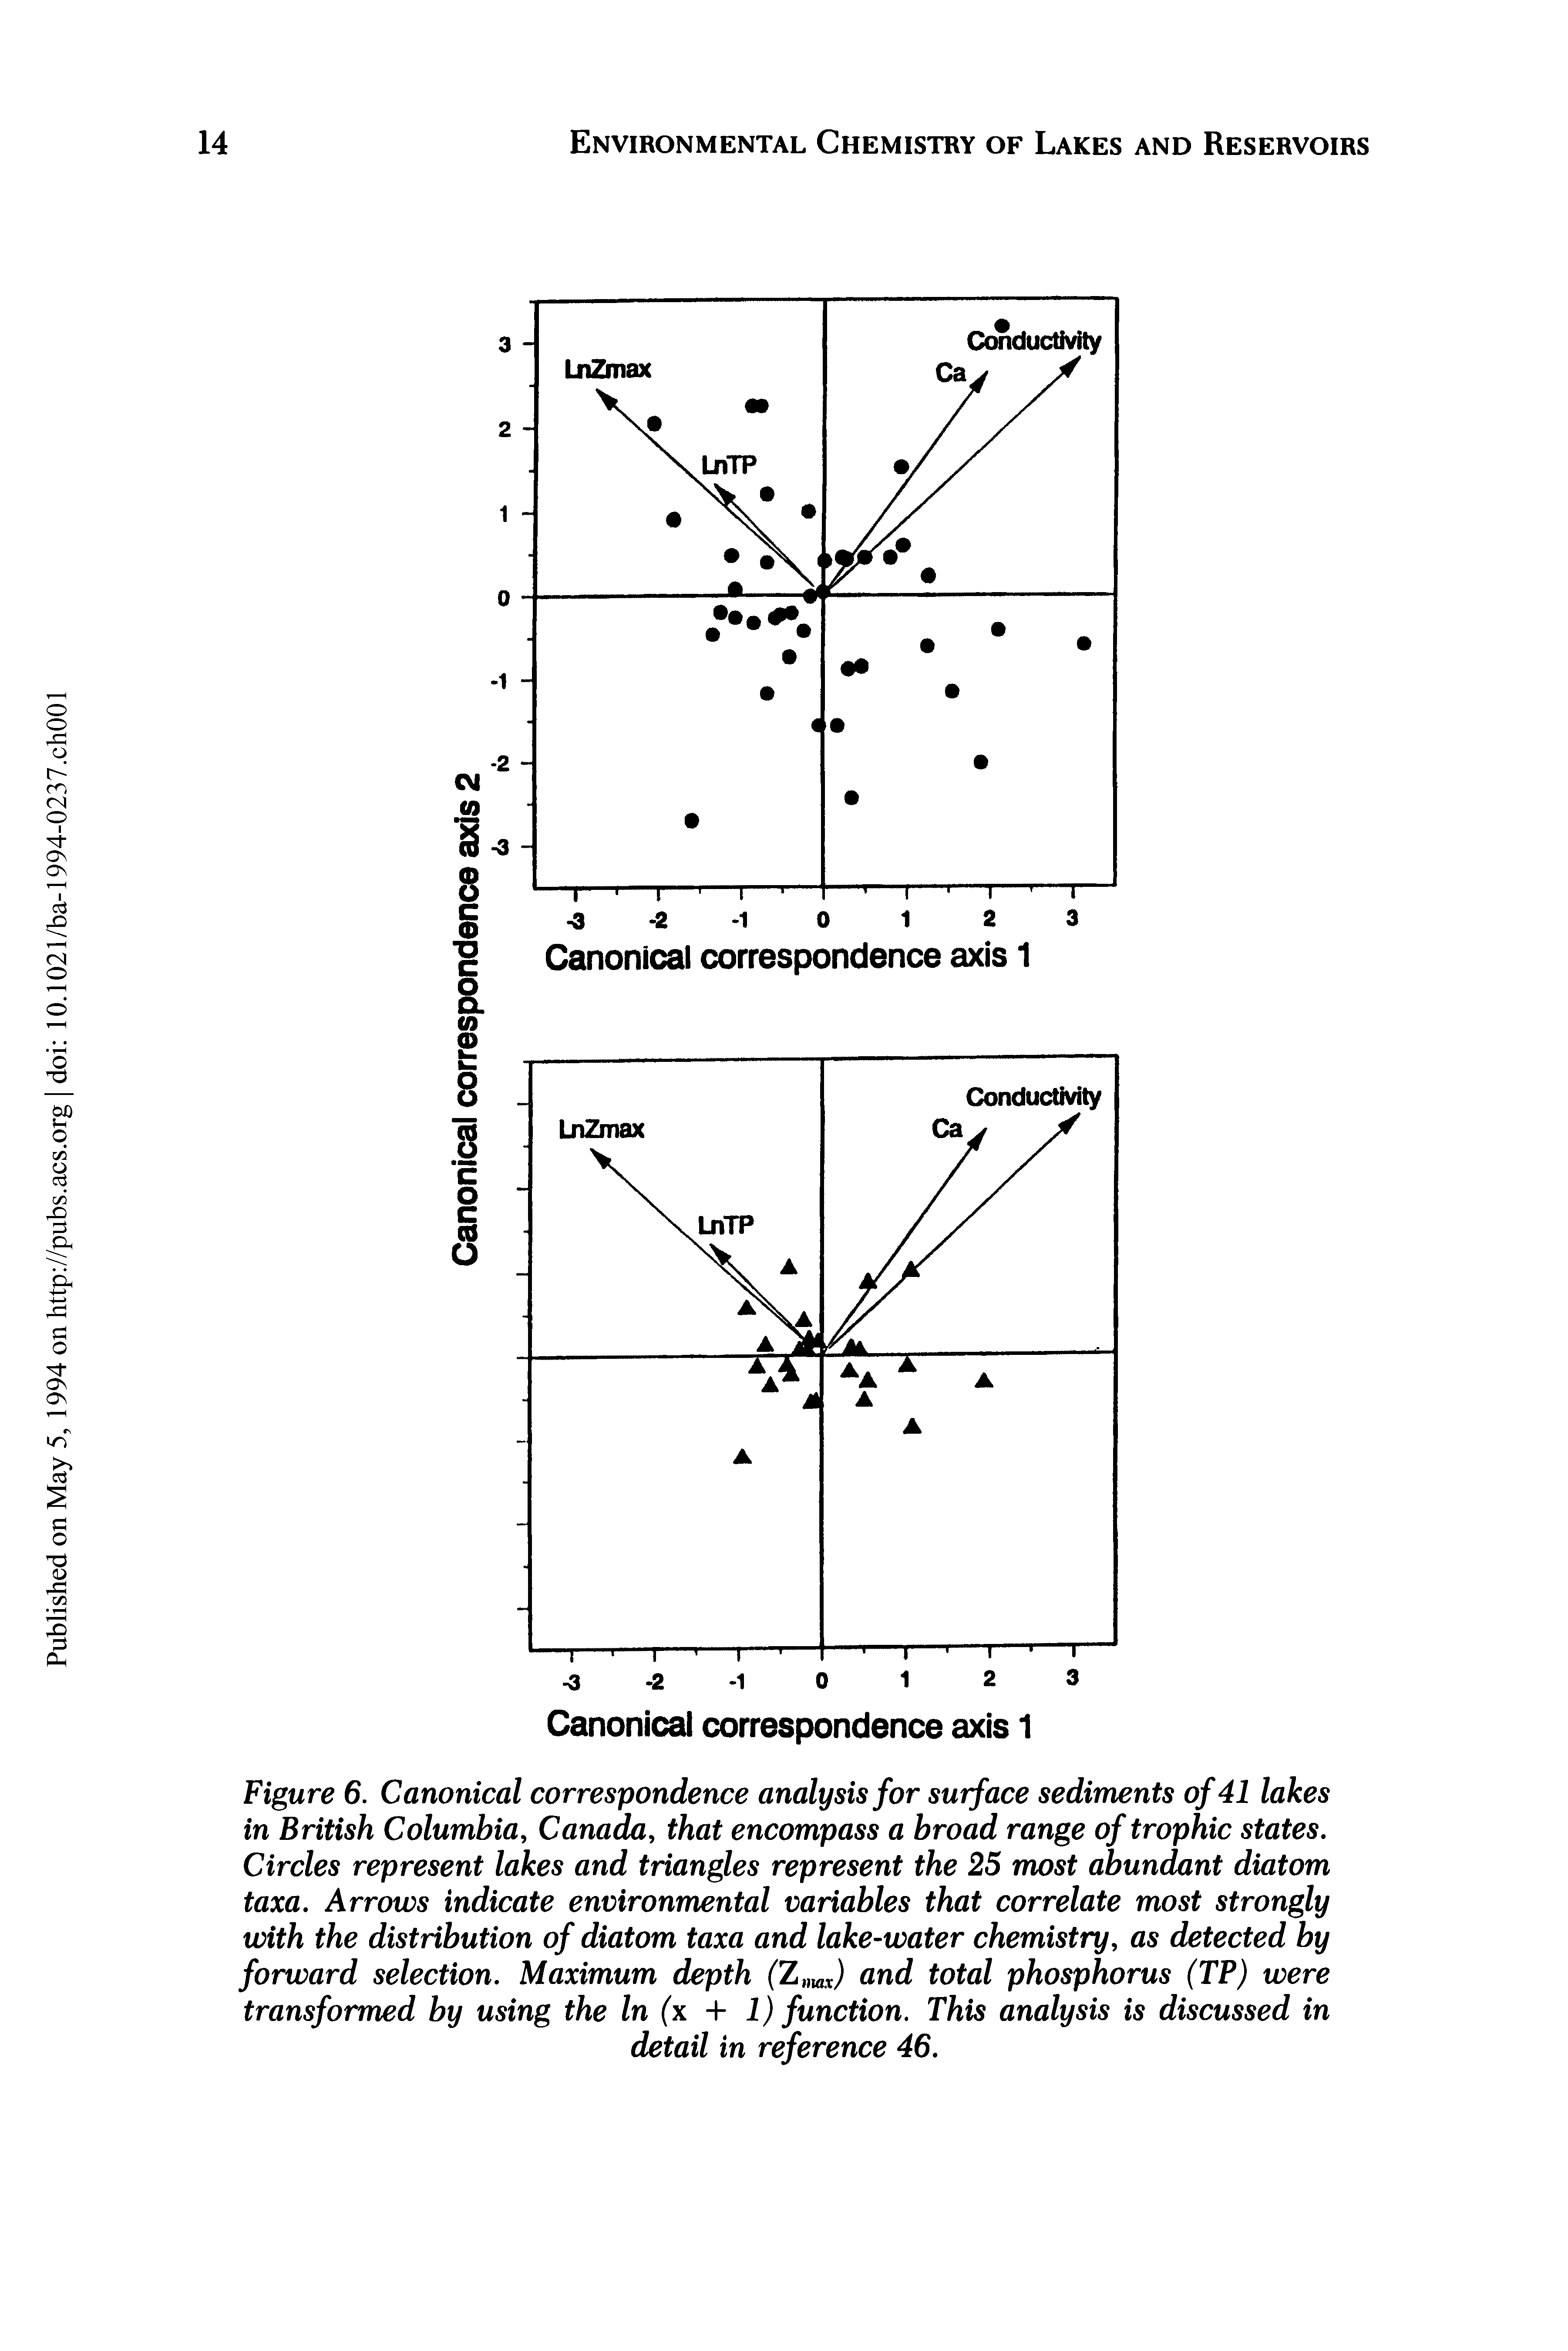 Figure 6. Canonical correspondence analysis for surface sediments of 41 lakes in British Columbia, Canada, that encompass a broad range of trophic states. Circles represent lakes and triangles represent the 25 most abundant diatom taxa. Arrows indicate environmental variables that correlate most strongly with the distribution of diatom taxa and lake-water chemistry, as detected by forward selection. Maximum depth (Zntax) and total phosphorus (TP) were transformed by using the In (x + 1) function. This analysis is discussed in detail in reference 46.